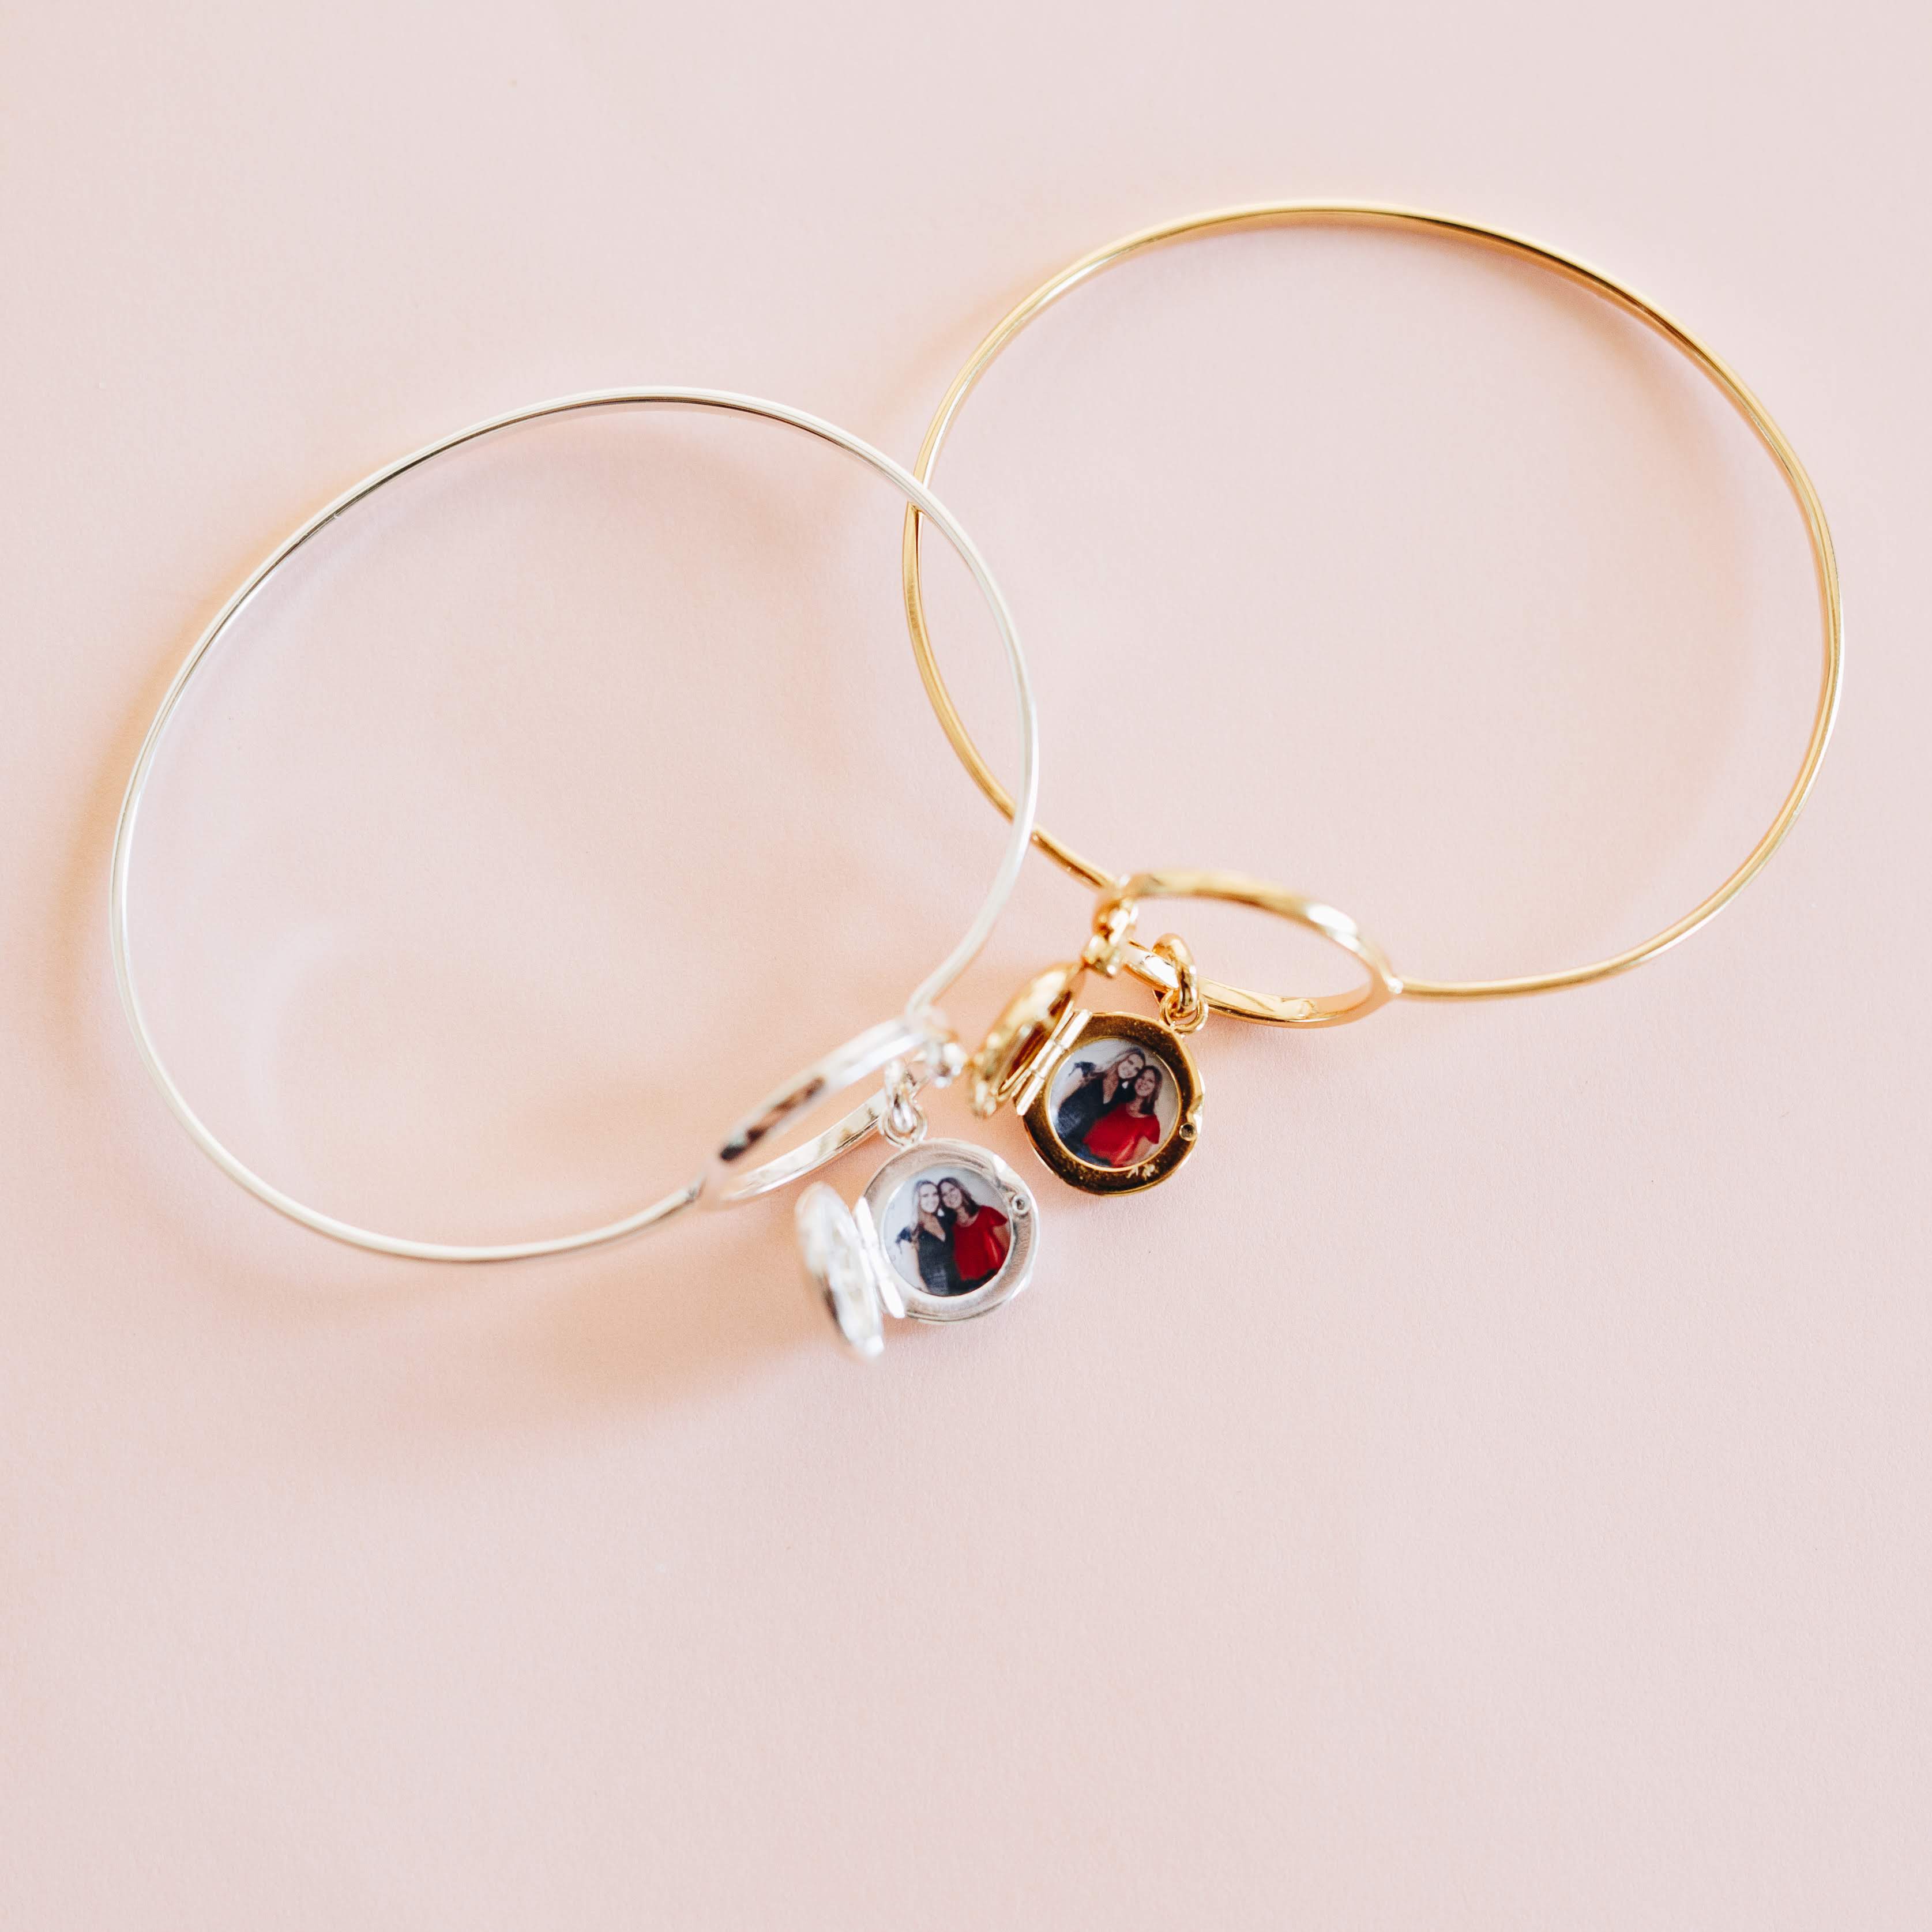 The Bangle Locket Bracelet in Silver and Gold